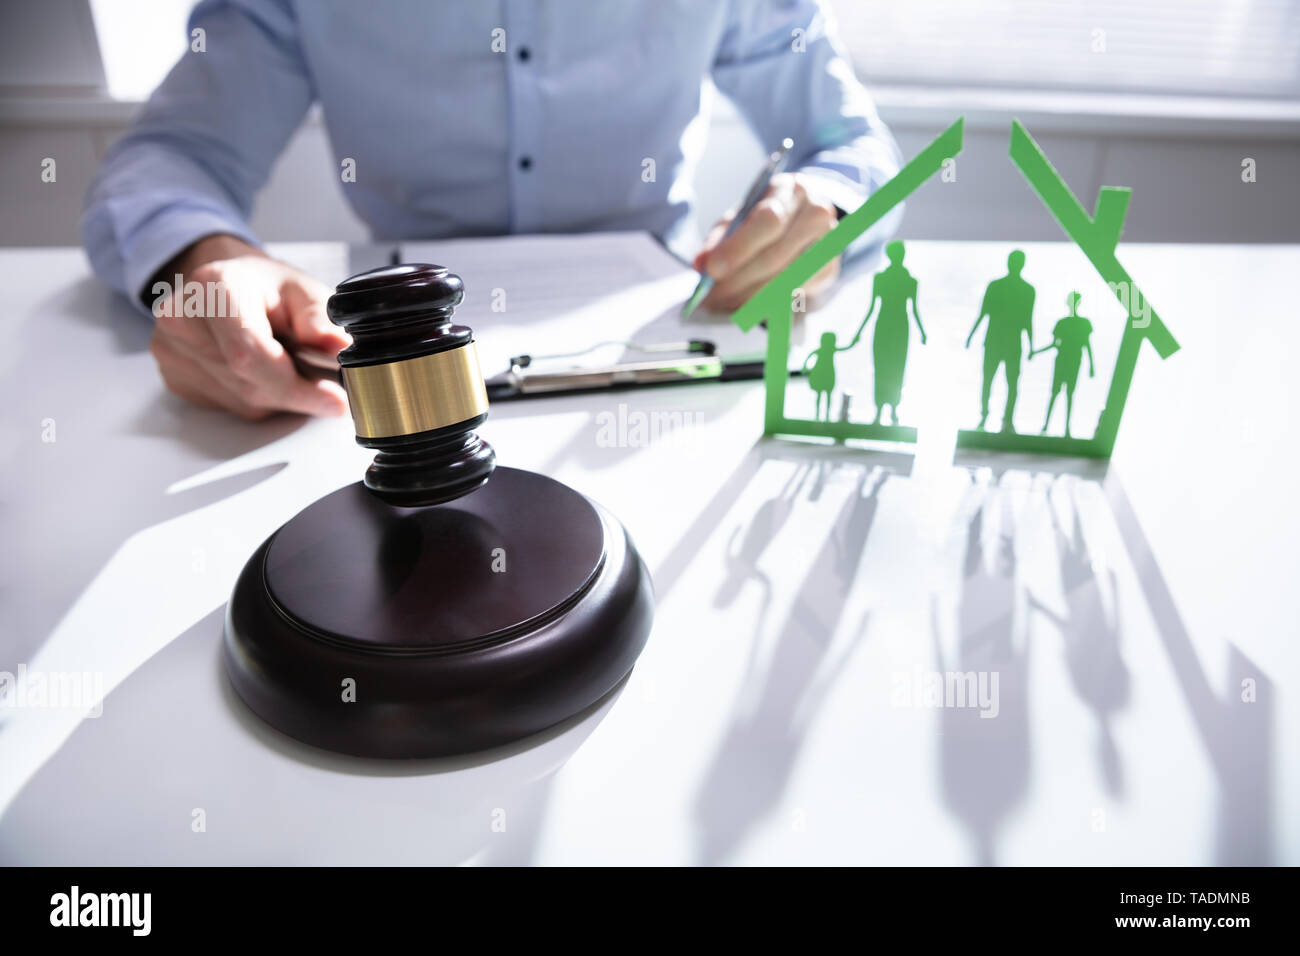 Close-up of mallet showing separation of family and house on desk Stock Photo